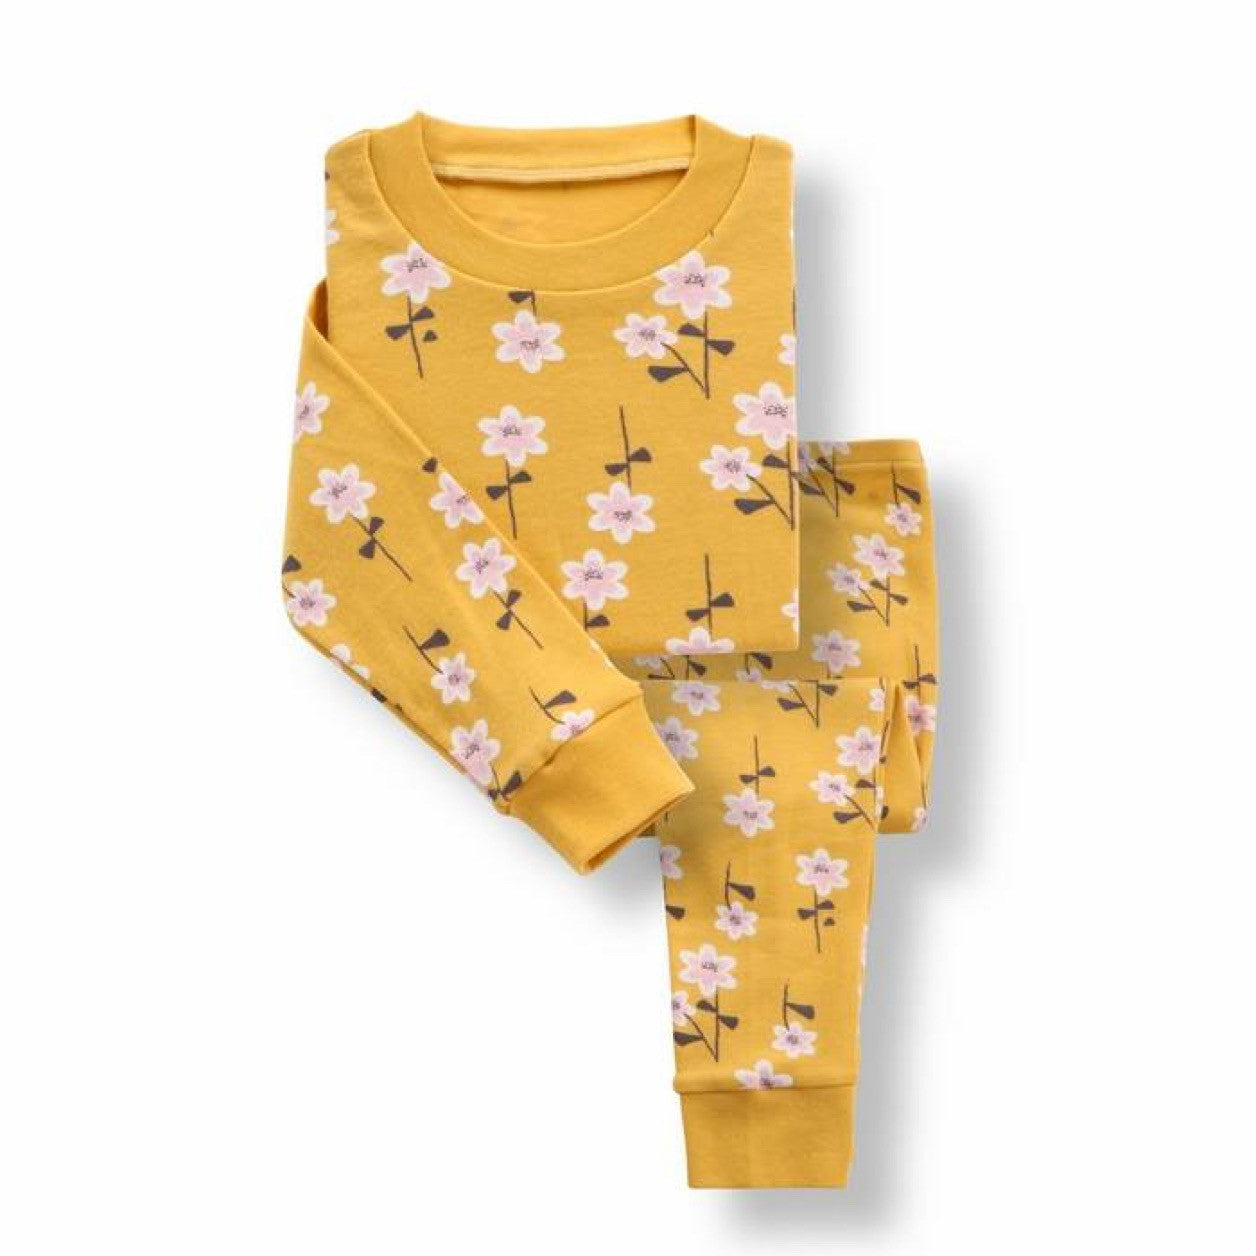 Benben Apparel Yellow Flowers - Made With 100% Cotton